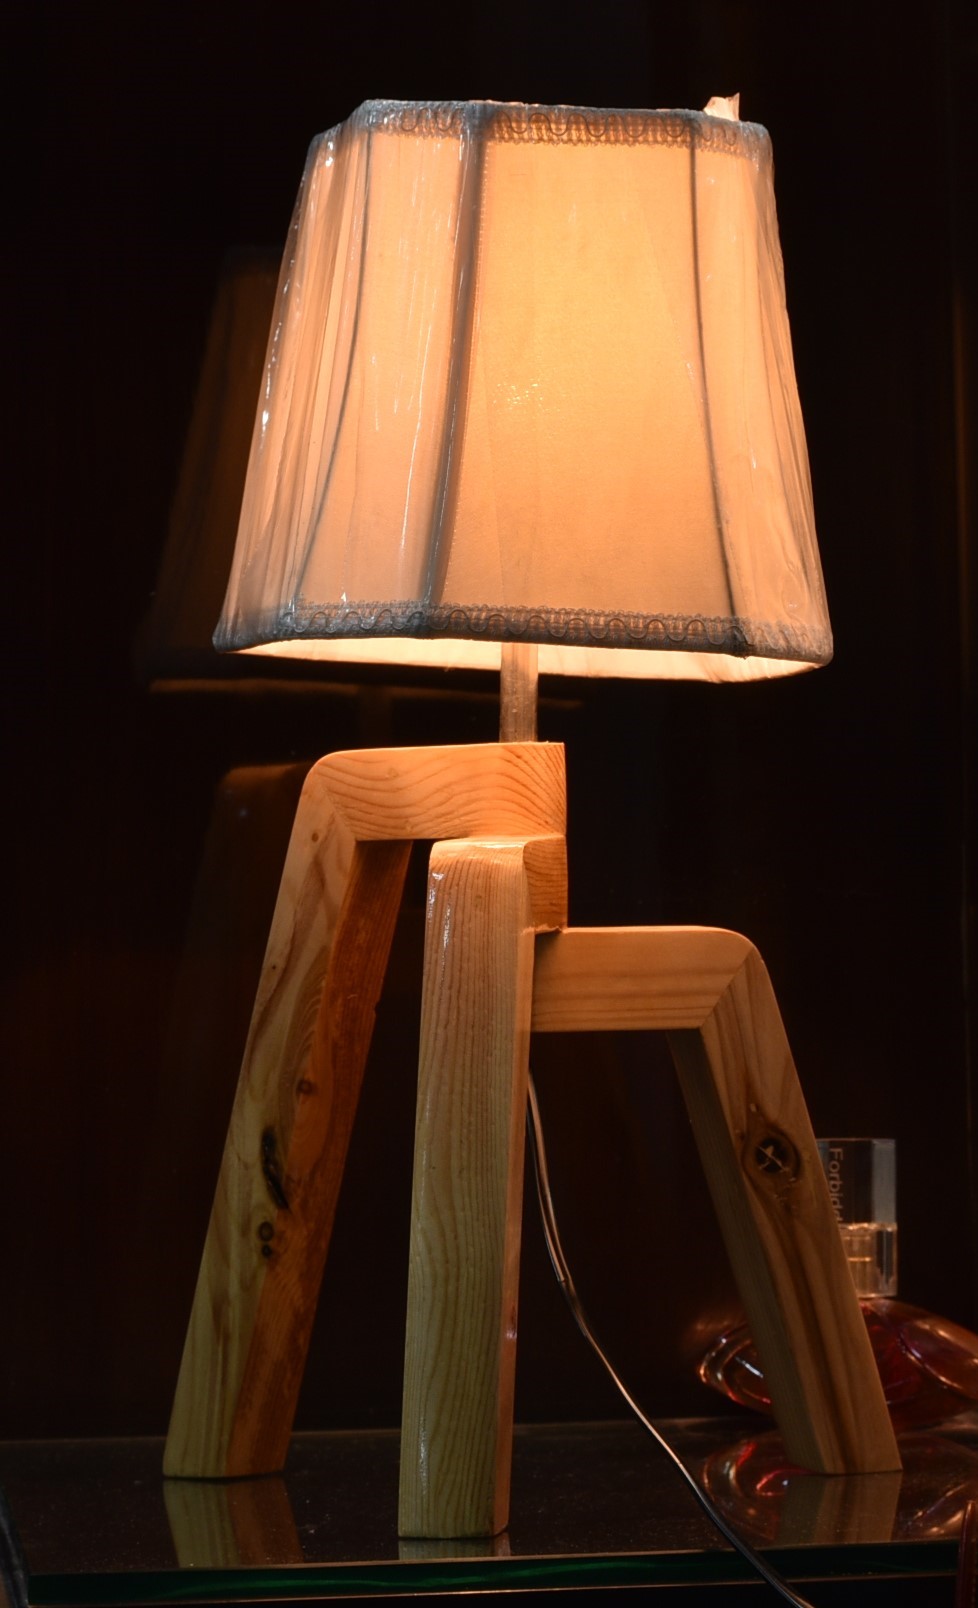 Bedside Table Lamps Online - bmp-tomfoolery